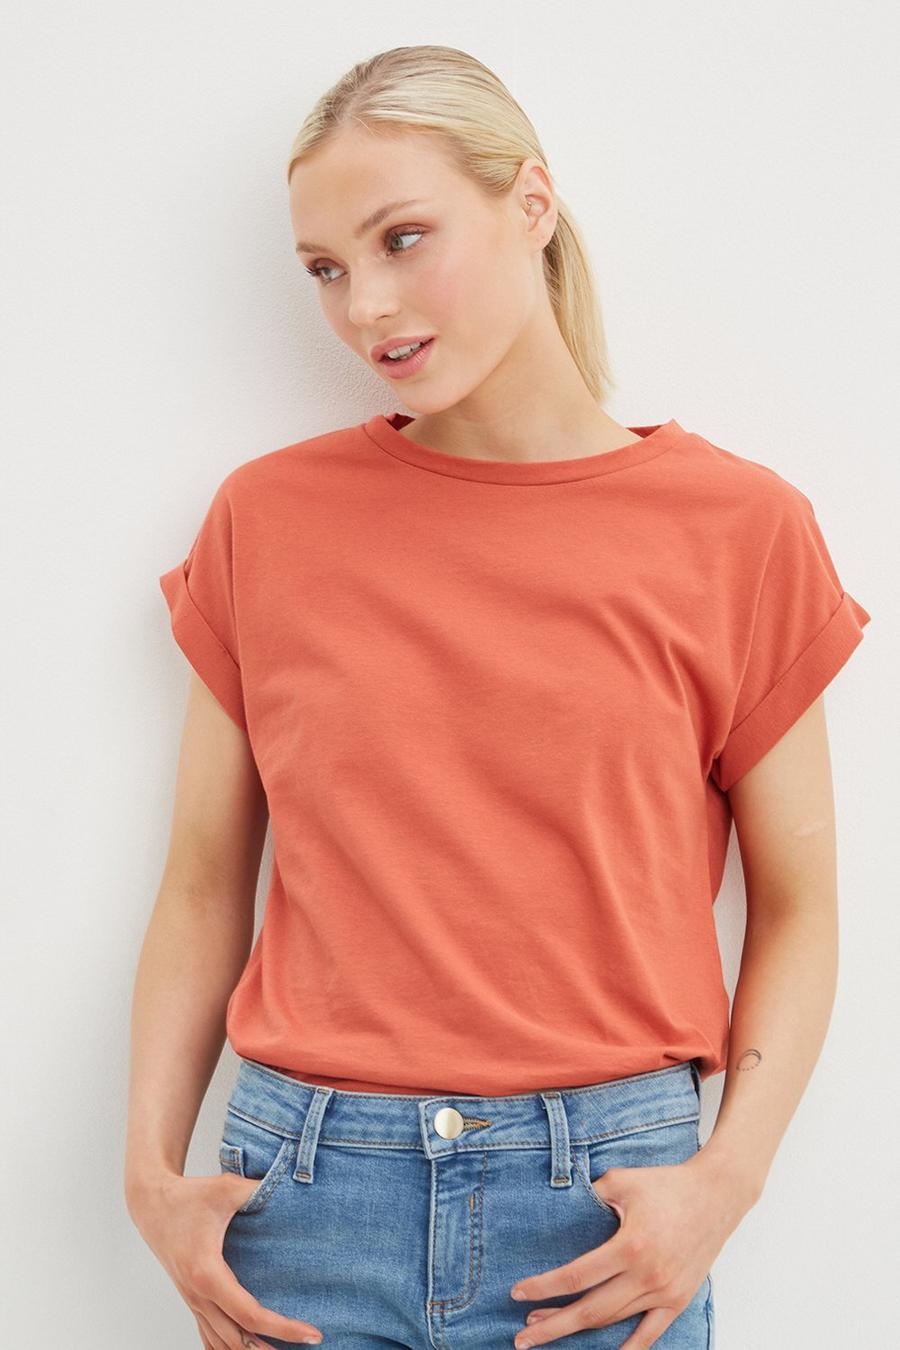 Petite More Sustainable Cotton T-Shirt